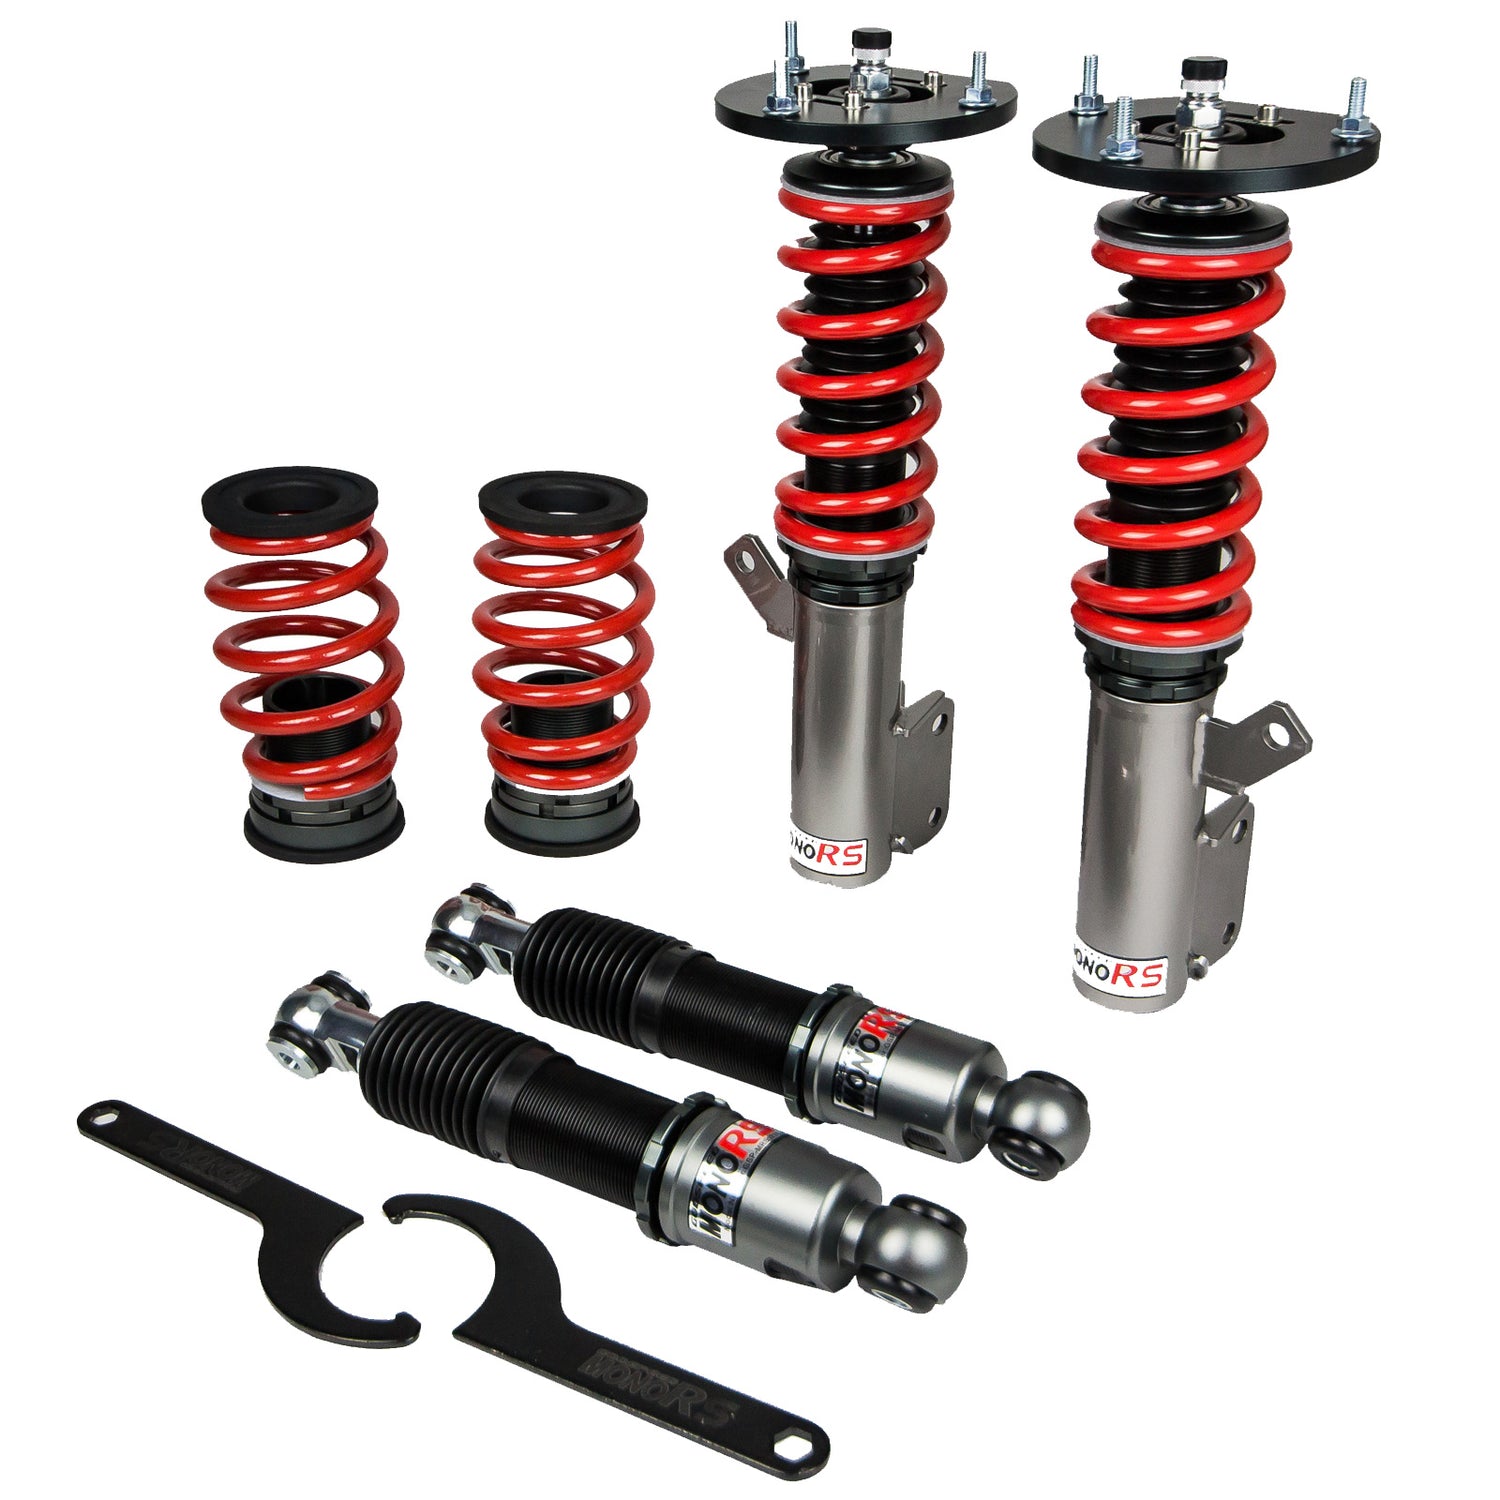 Godspeed MRS1770-C MonoRS Coilover Lowering Kit, 32 Damping Adjustment, Ride Height Adjustable